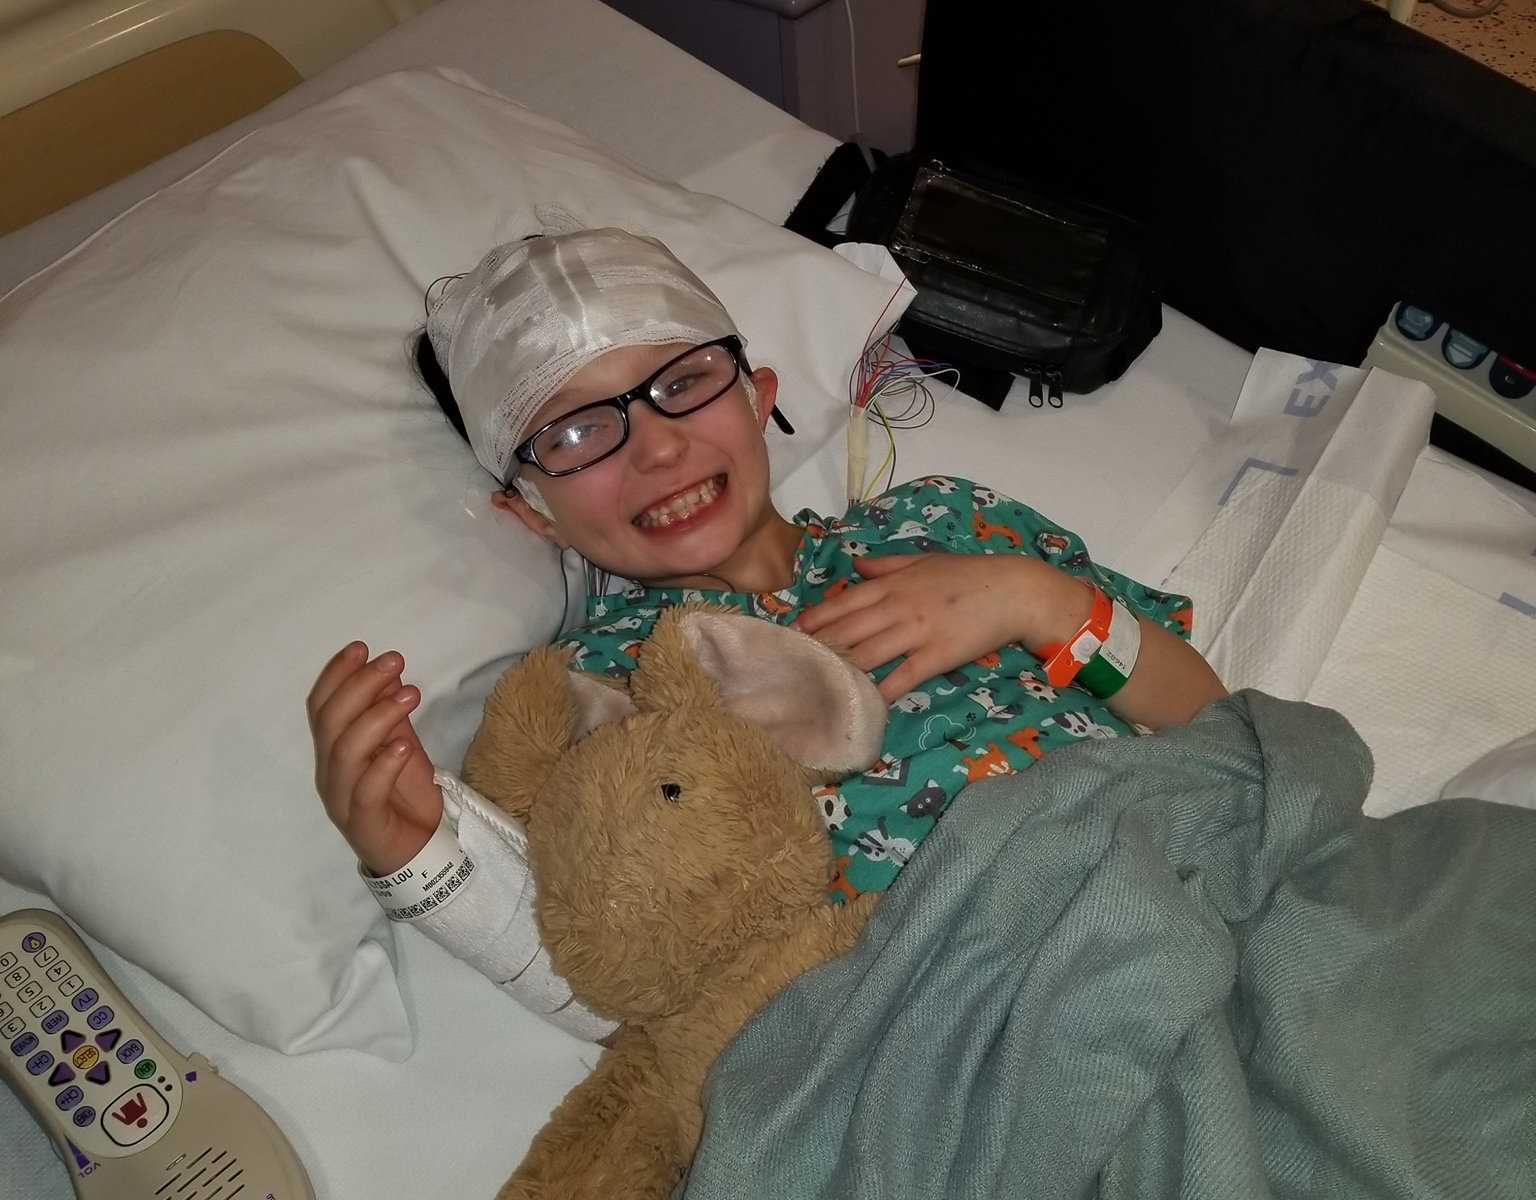 Nine year old who suffers from seizures smiling in hospital bed with stuffed animal and bandage on head